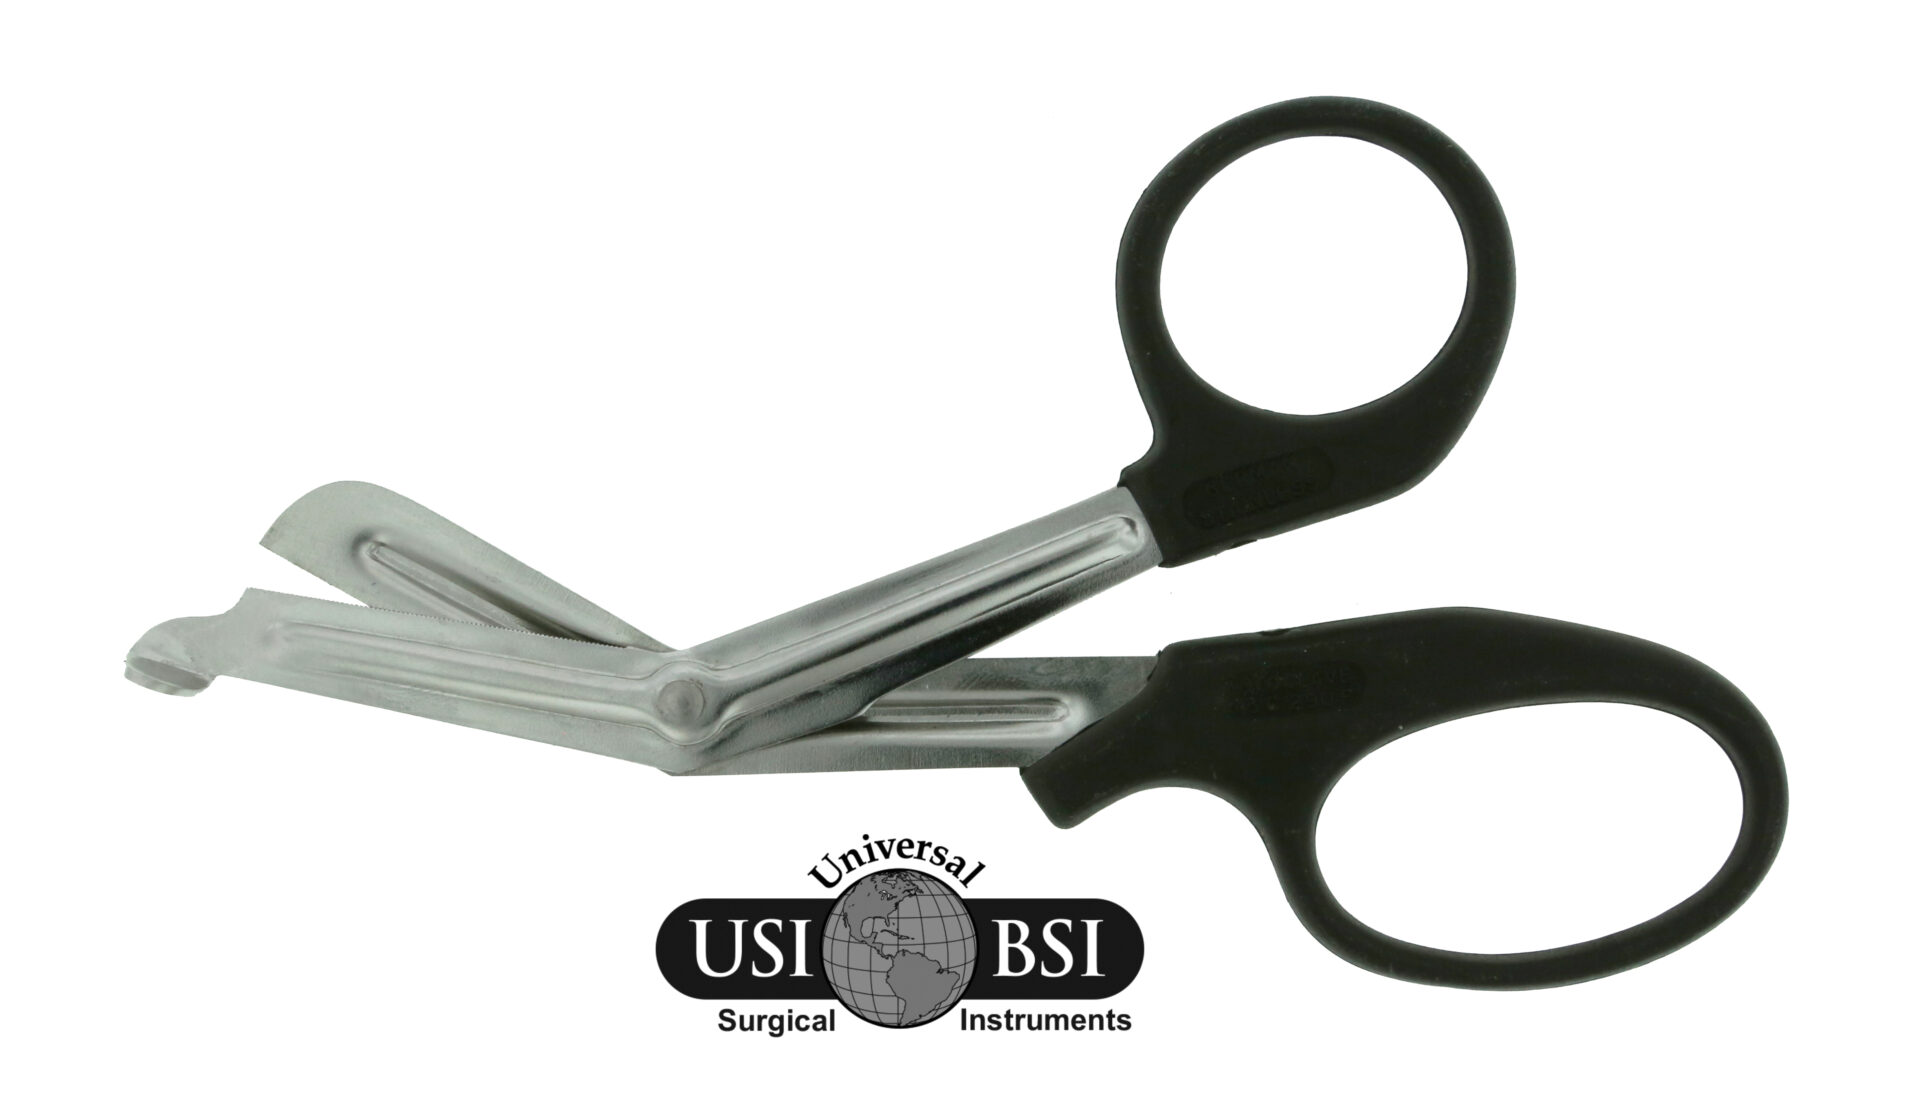 A pair of scissors with black handles and a rubber handle.